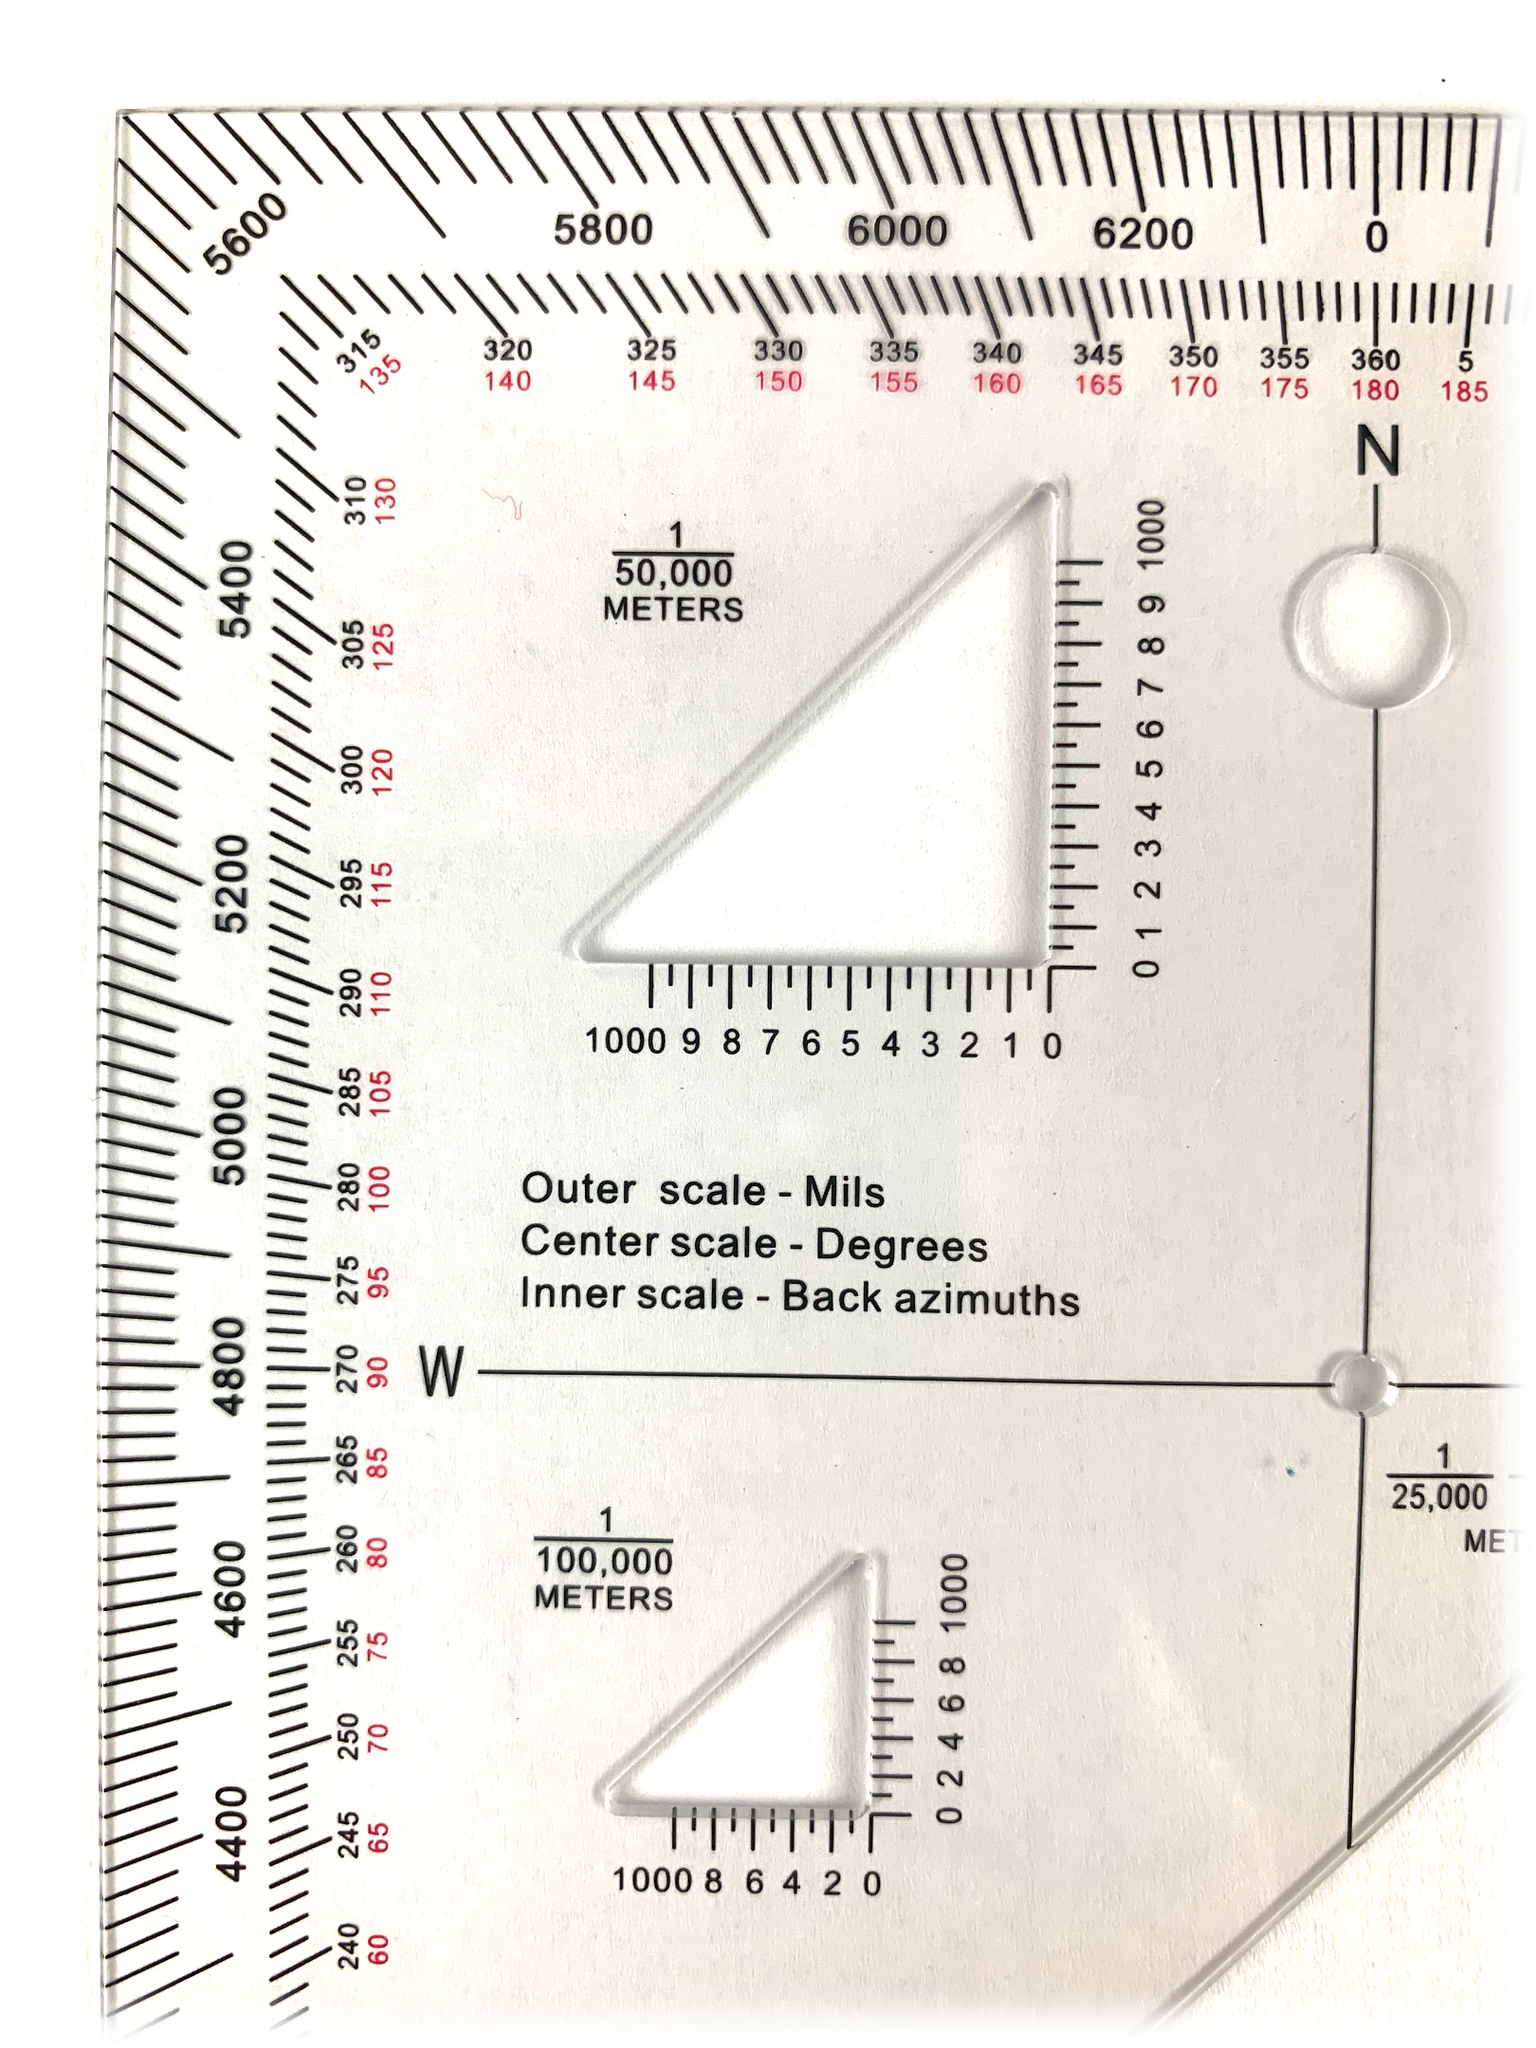 How to Use the Square Military Protractor ? 